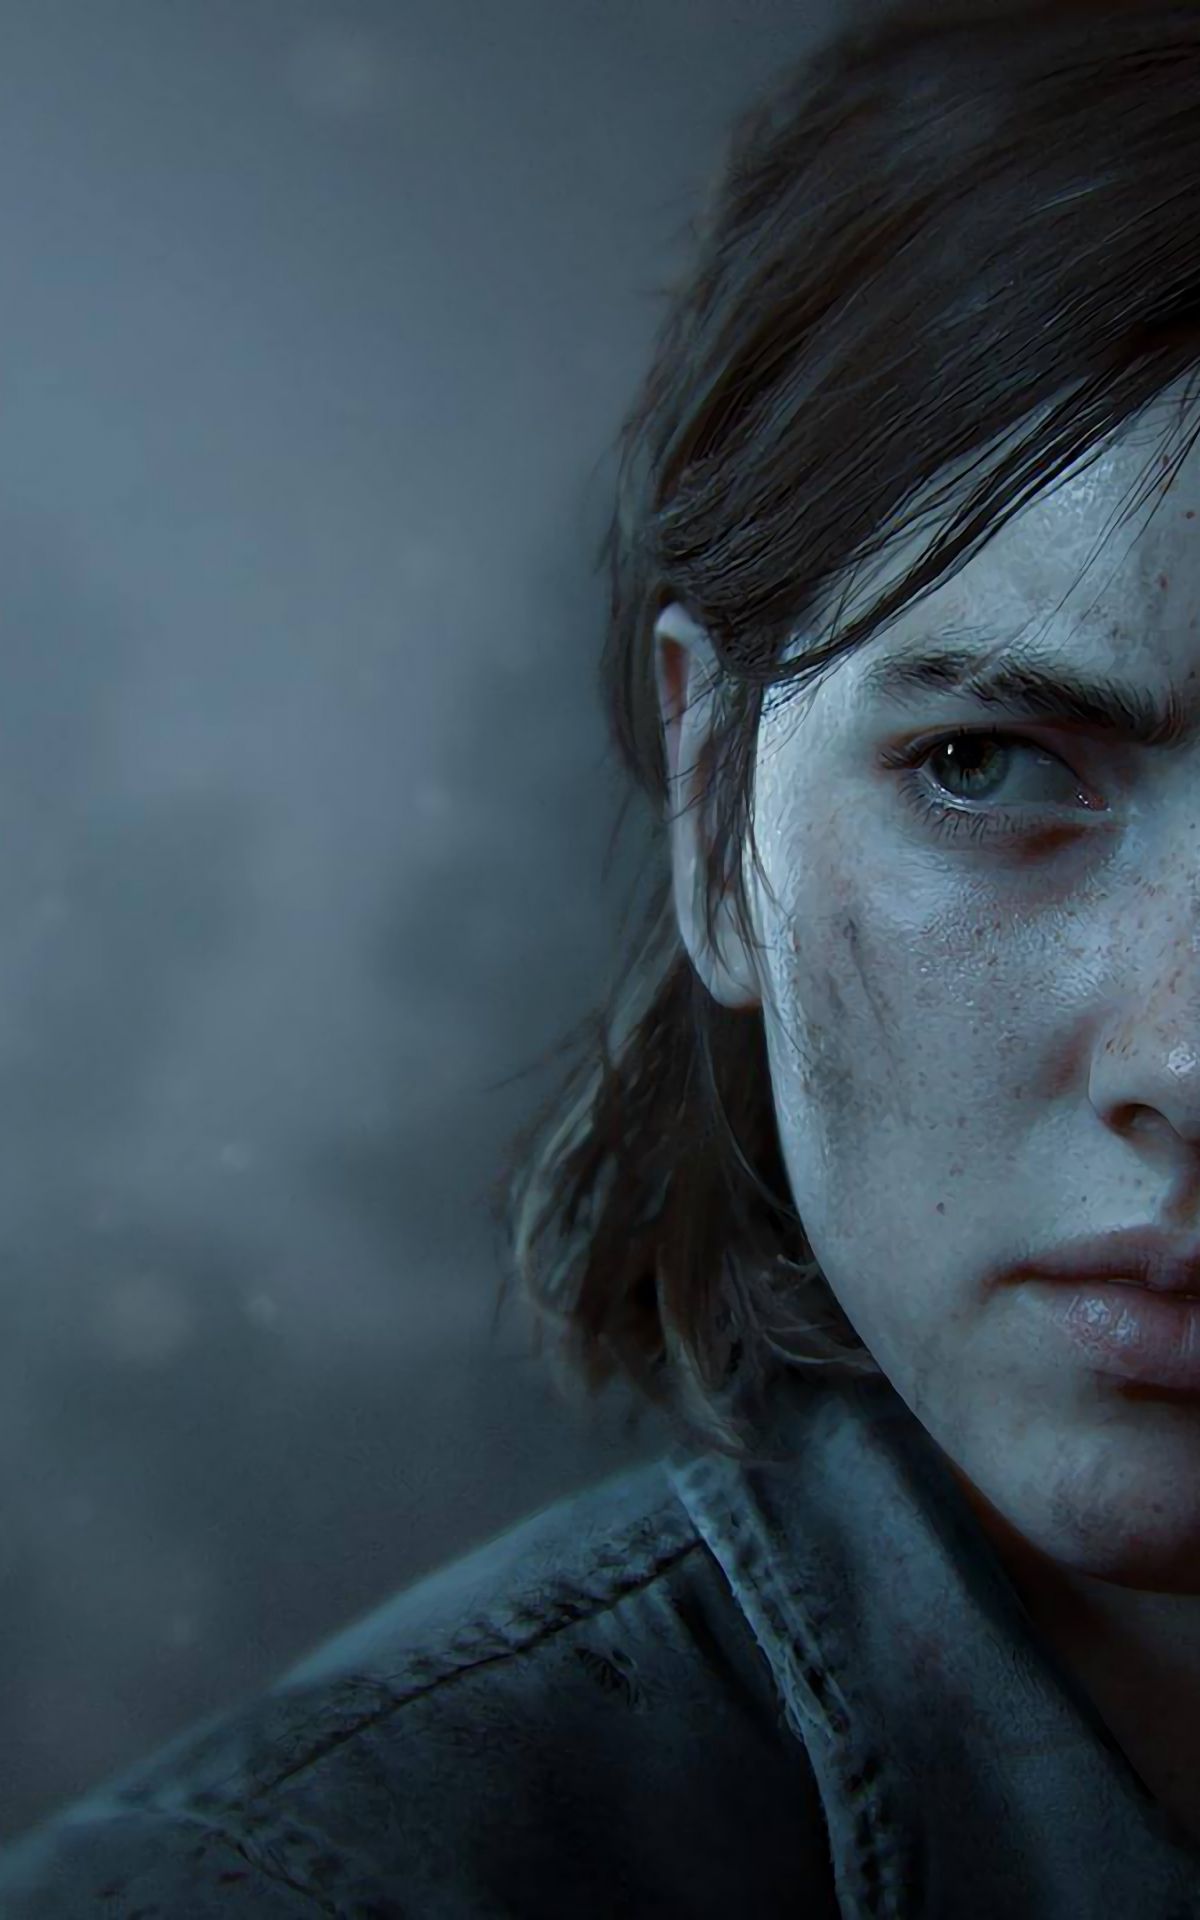 Free download The Last of Us 2 Wallpaper Top The Last of Us 2